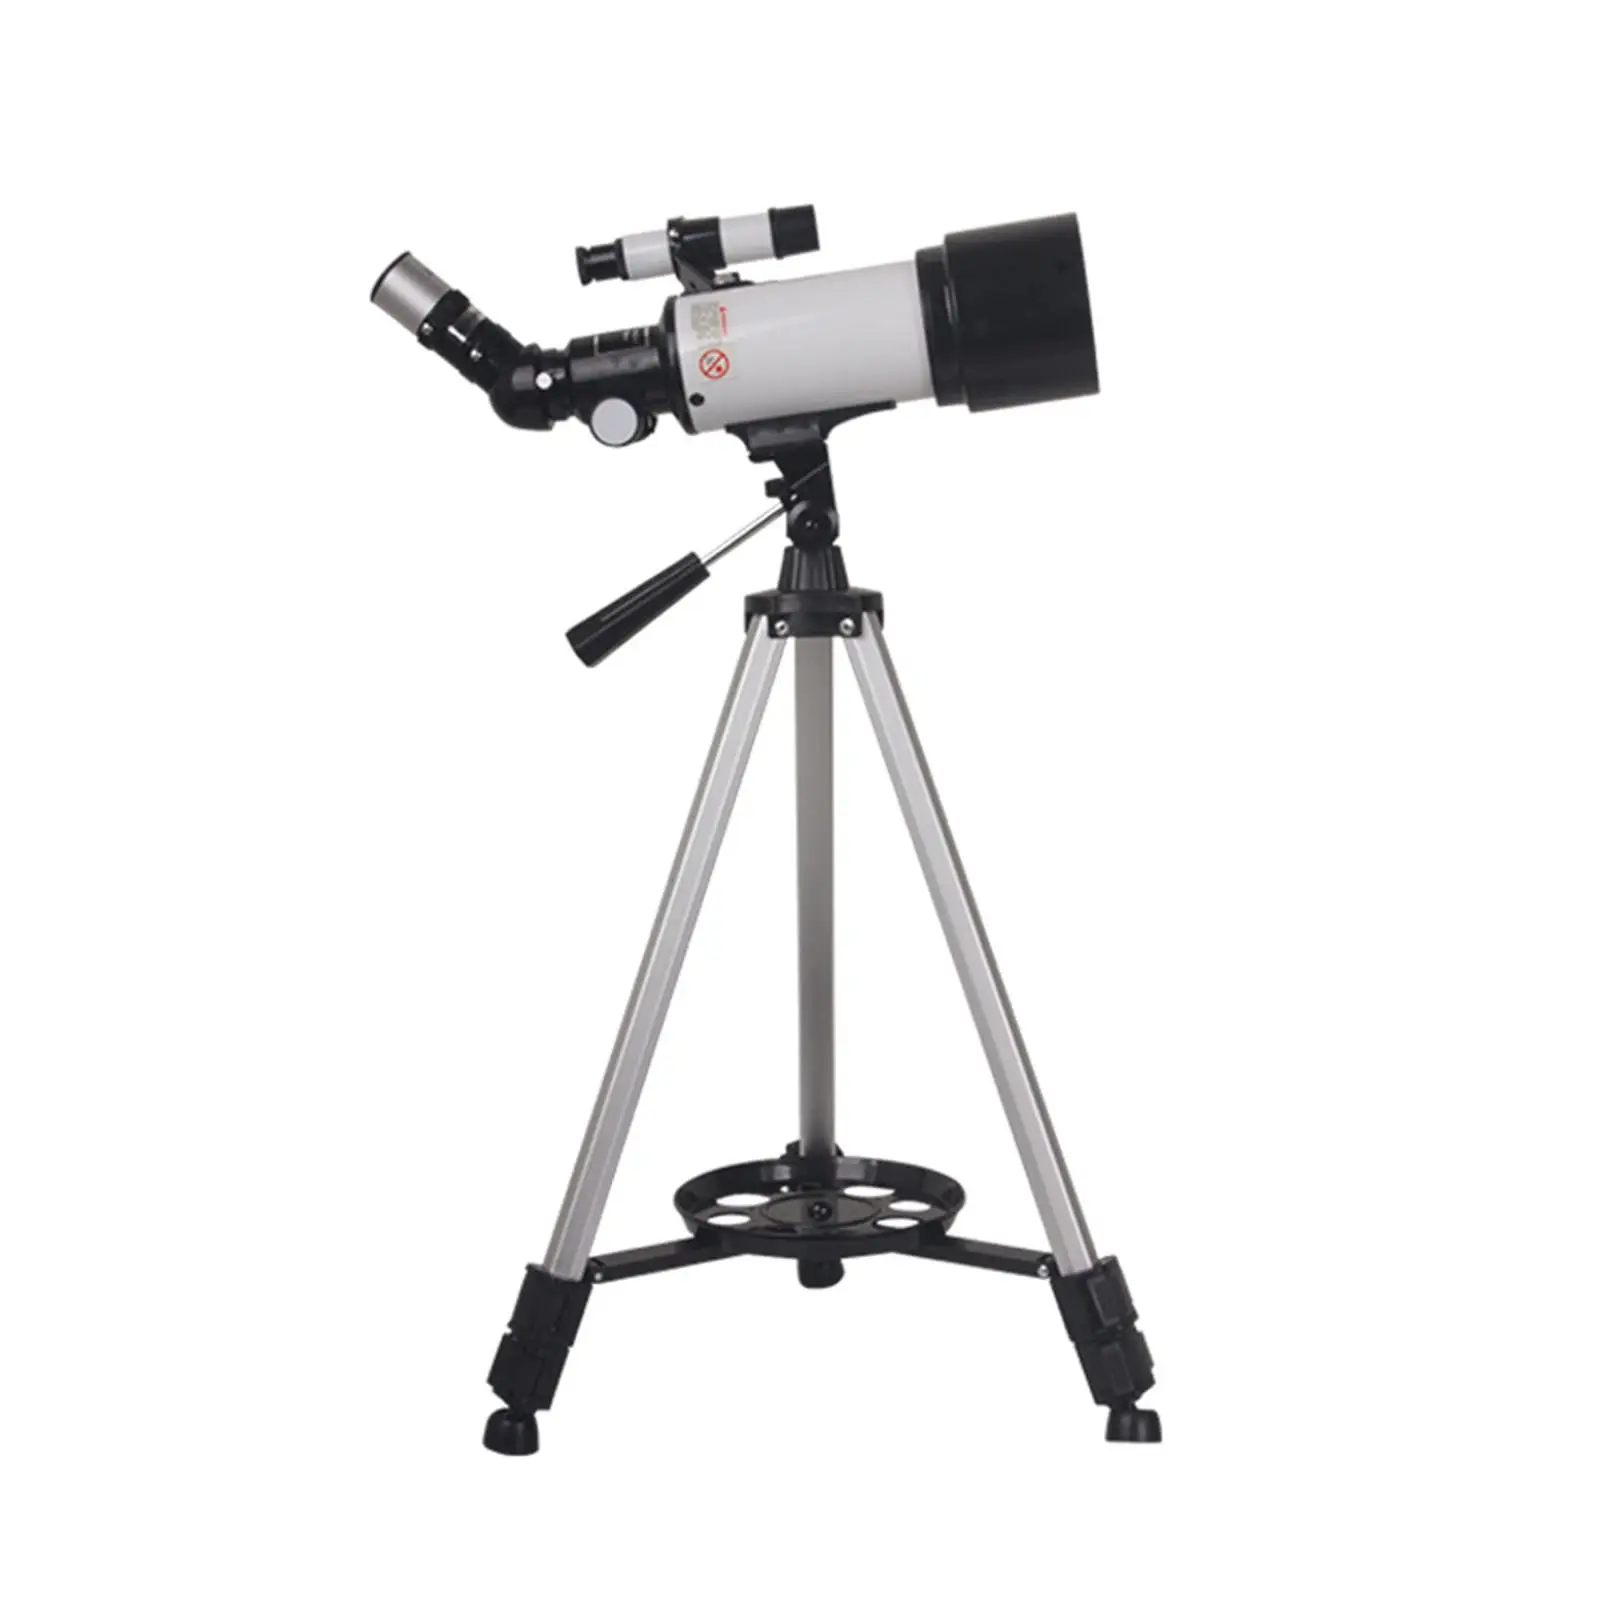 70mm Aperture 400mm Focal Length Telescope with Tripod for Beginners ,to Observe Celestial Objects AT Night Accessory Durable